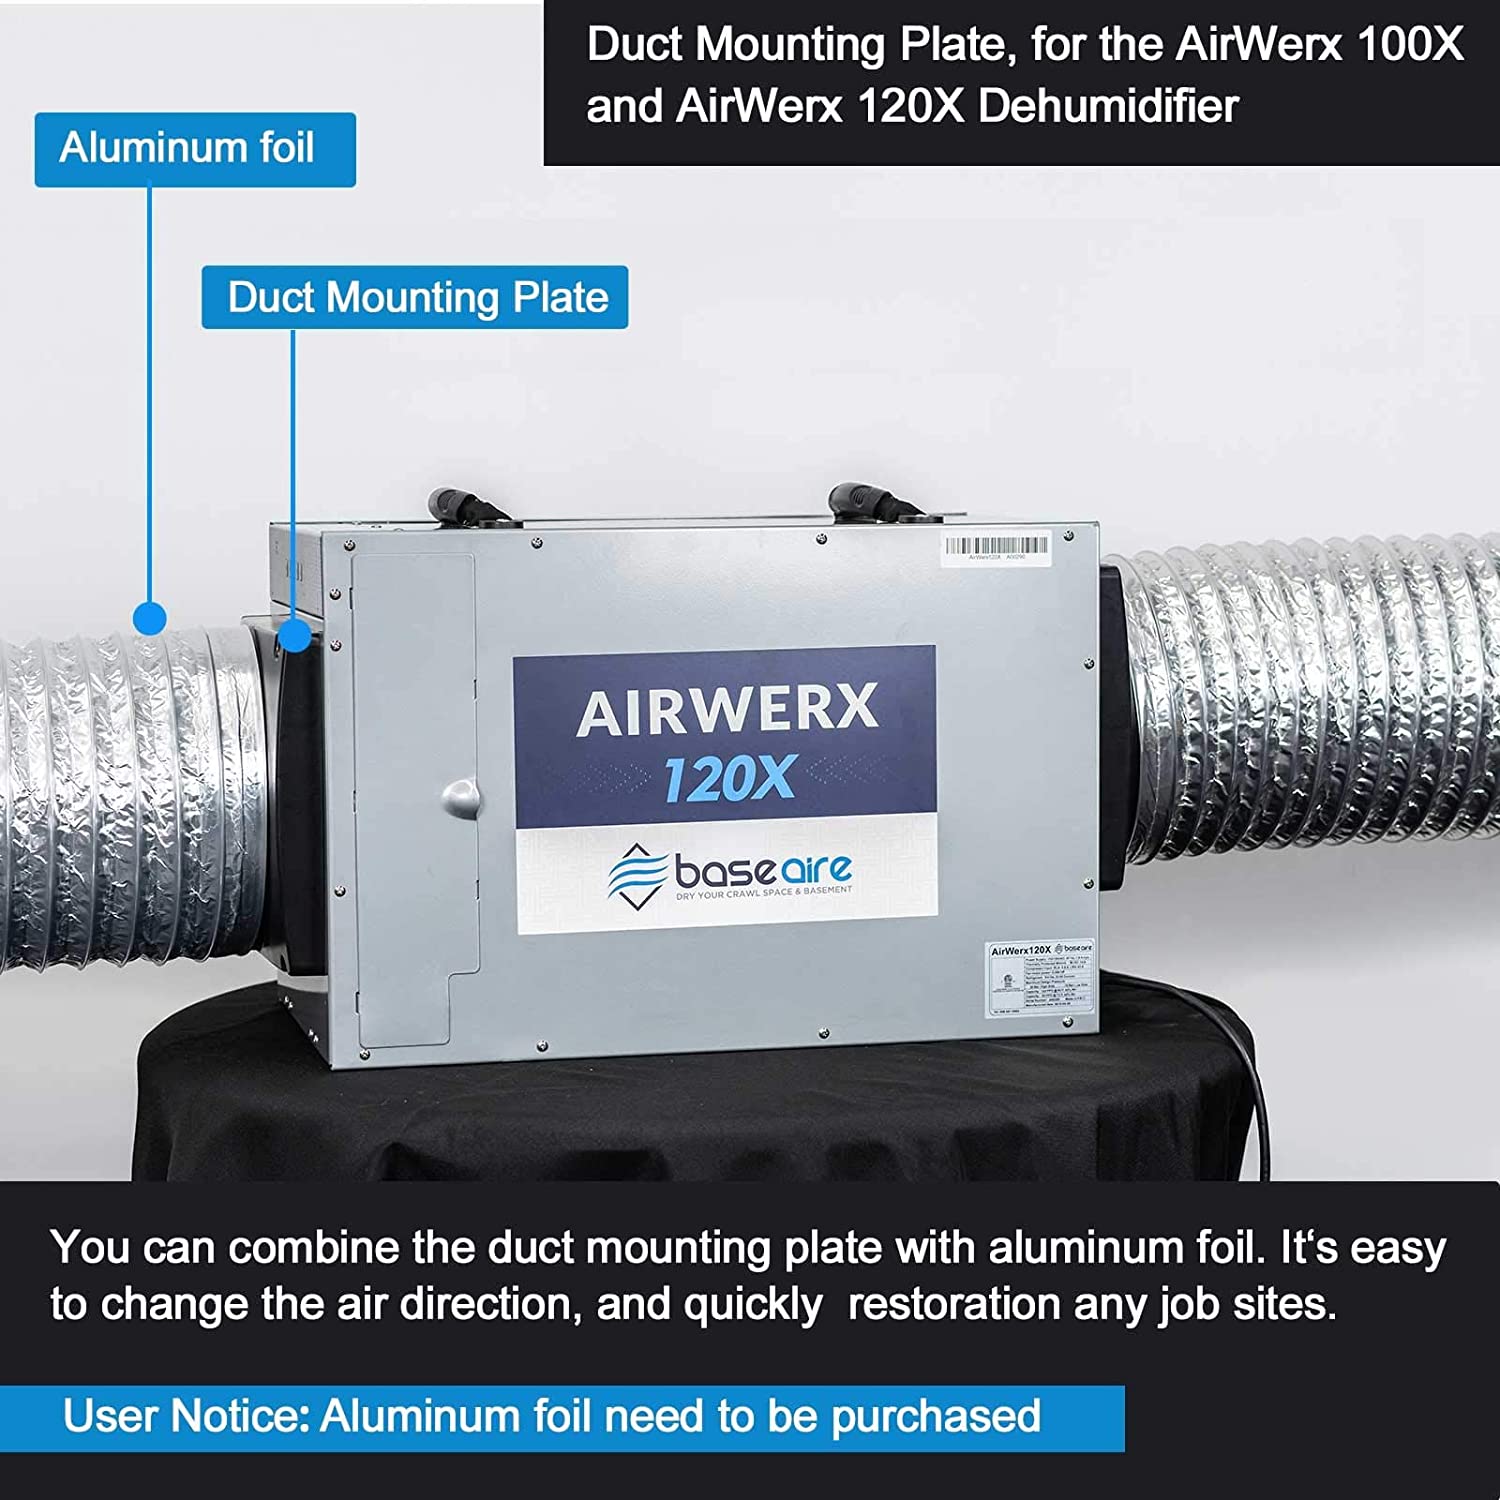 BaseAire Duct Mounting Plate for AirWerx 100X, AirWerx 120X